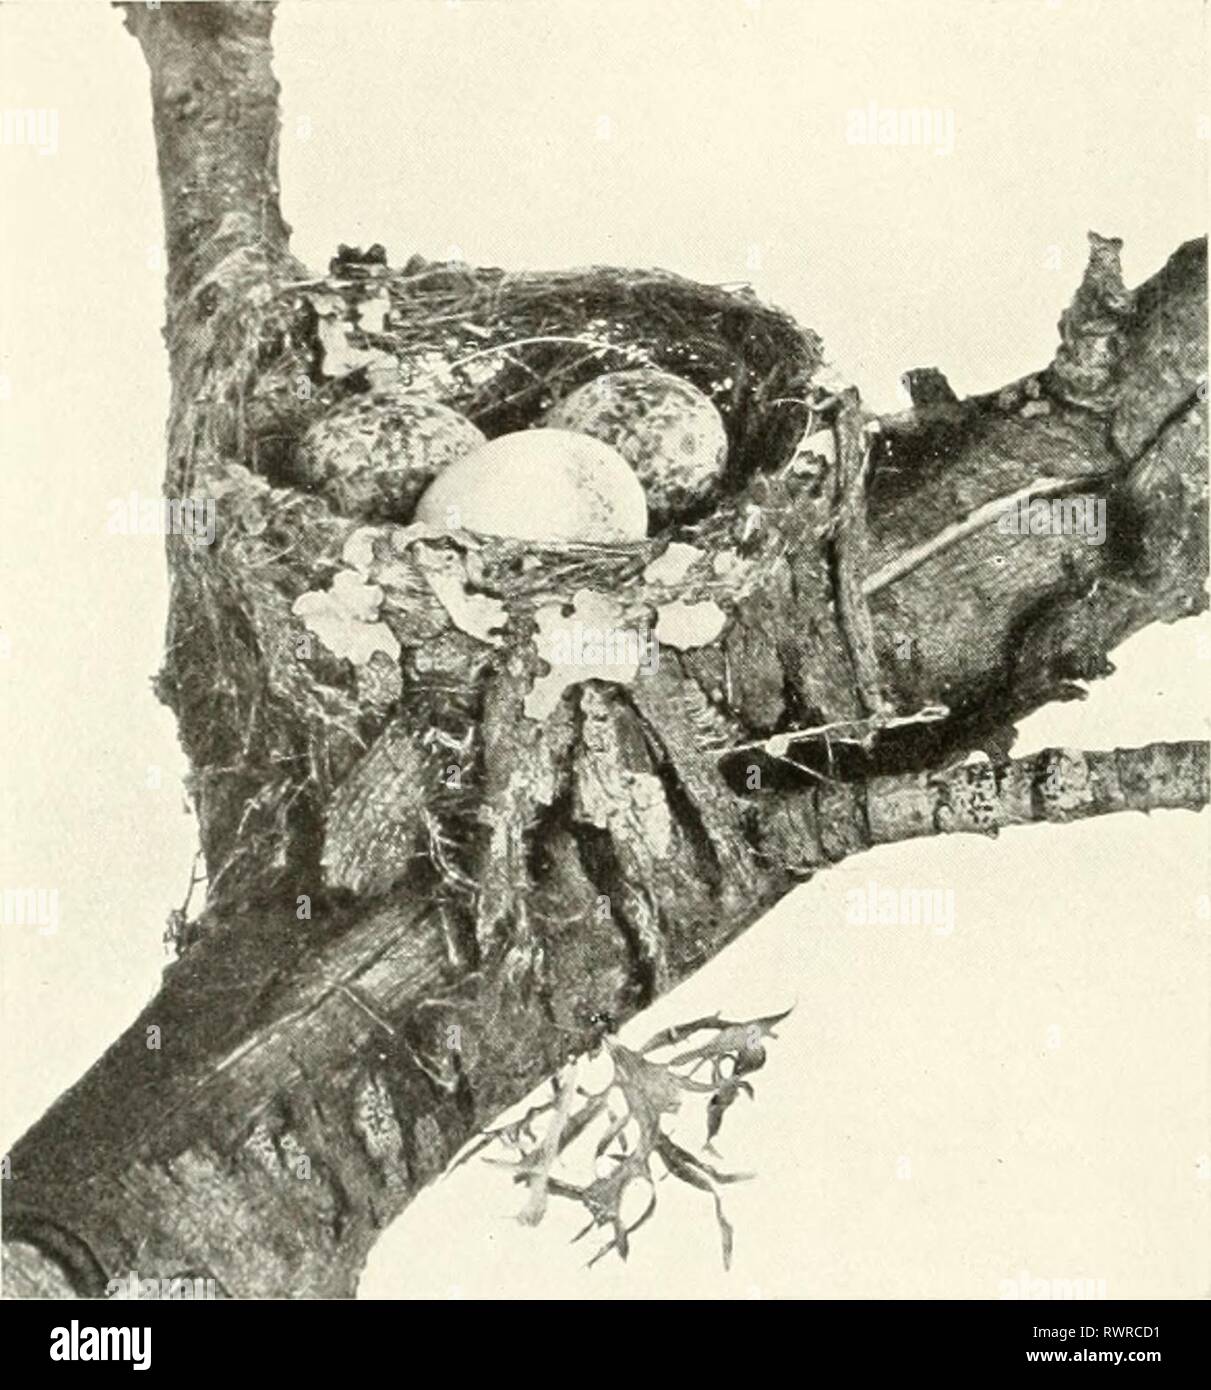 The Emu (1901) The Emu emu07aust Year: 1901  The Emu, I'oL VII. PLATE XIII.    Nest and Eggs of Brown Flycatcher (Mkrcvca fasciiians), with Egg of Square-tailed Cuckoo (Cacomantis variolosus). (Nearly natural size.) From * phoTo. by s w. jackson. Stock Photo